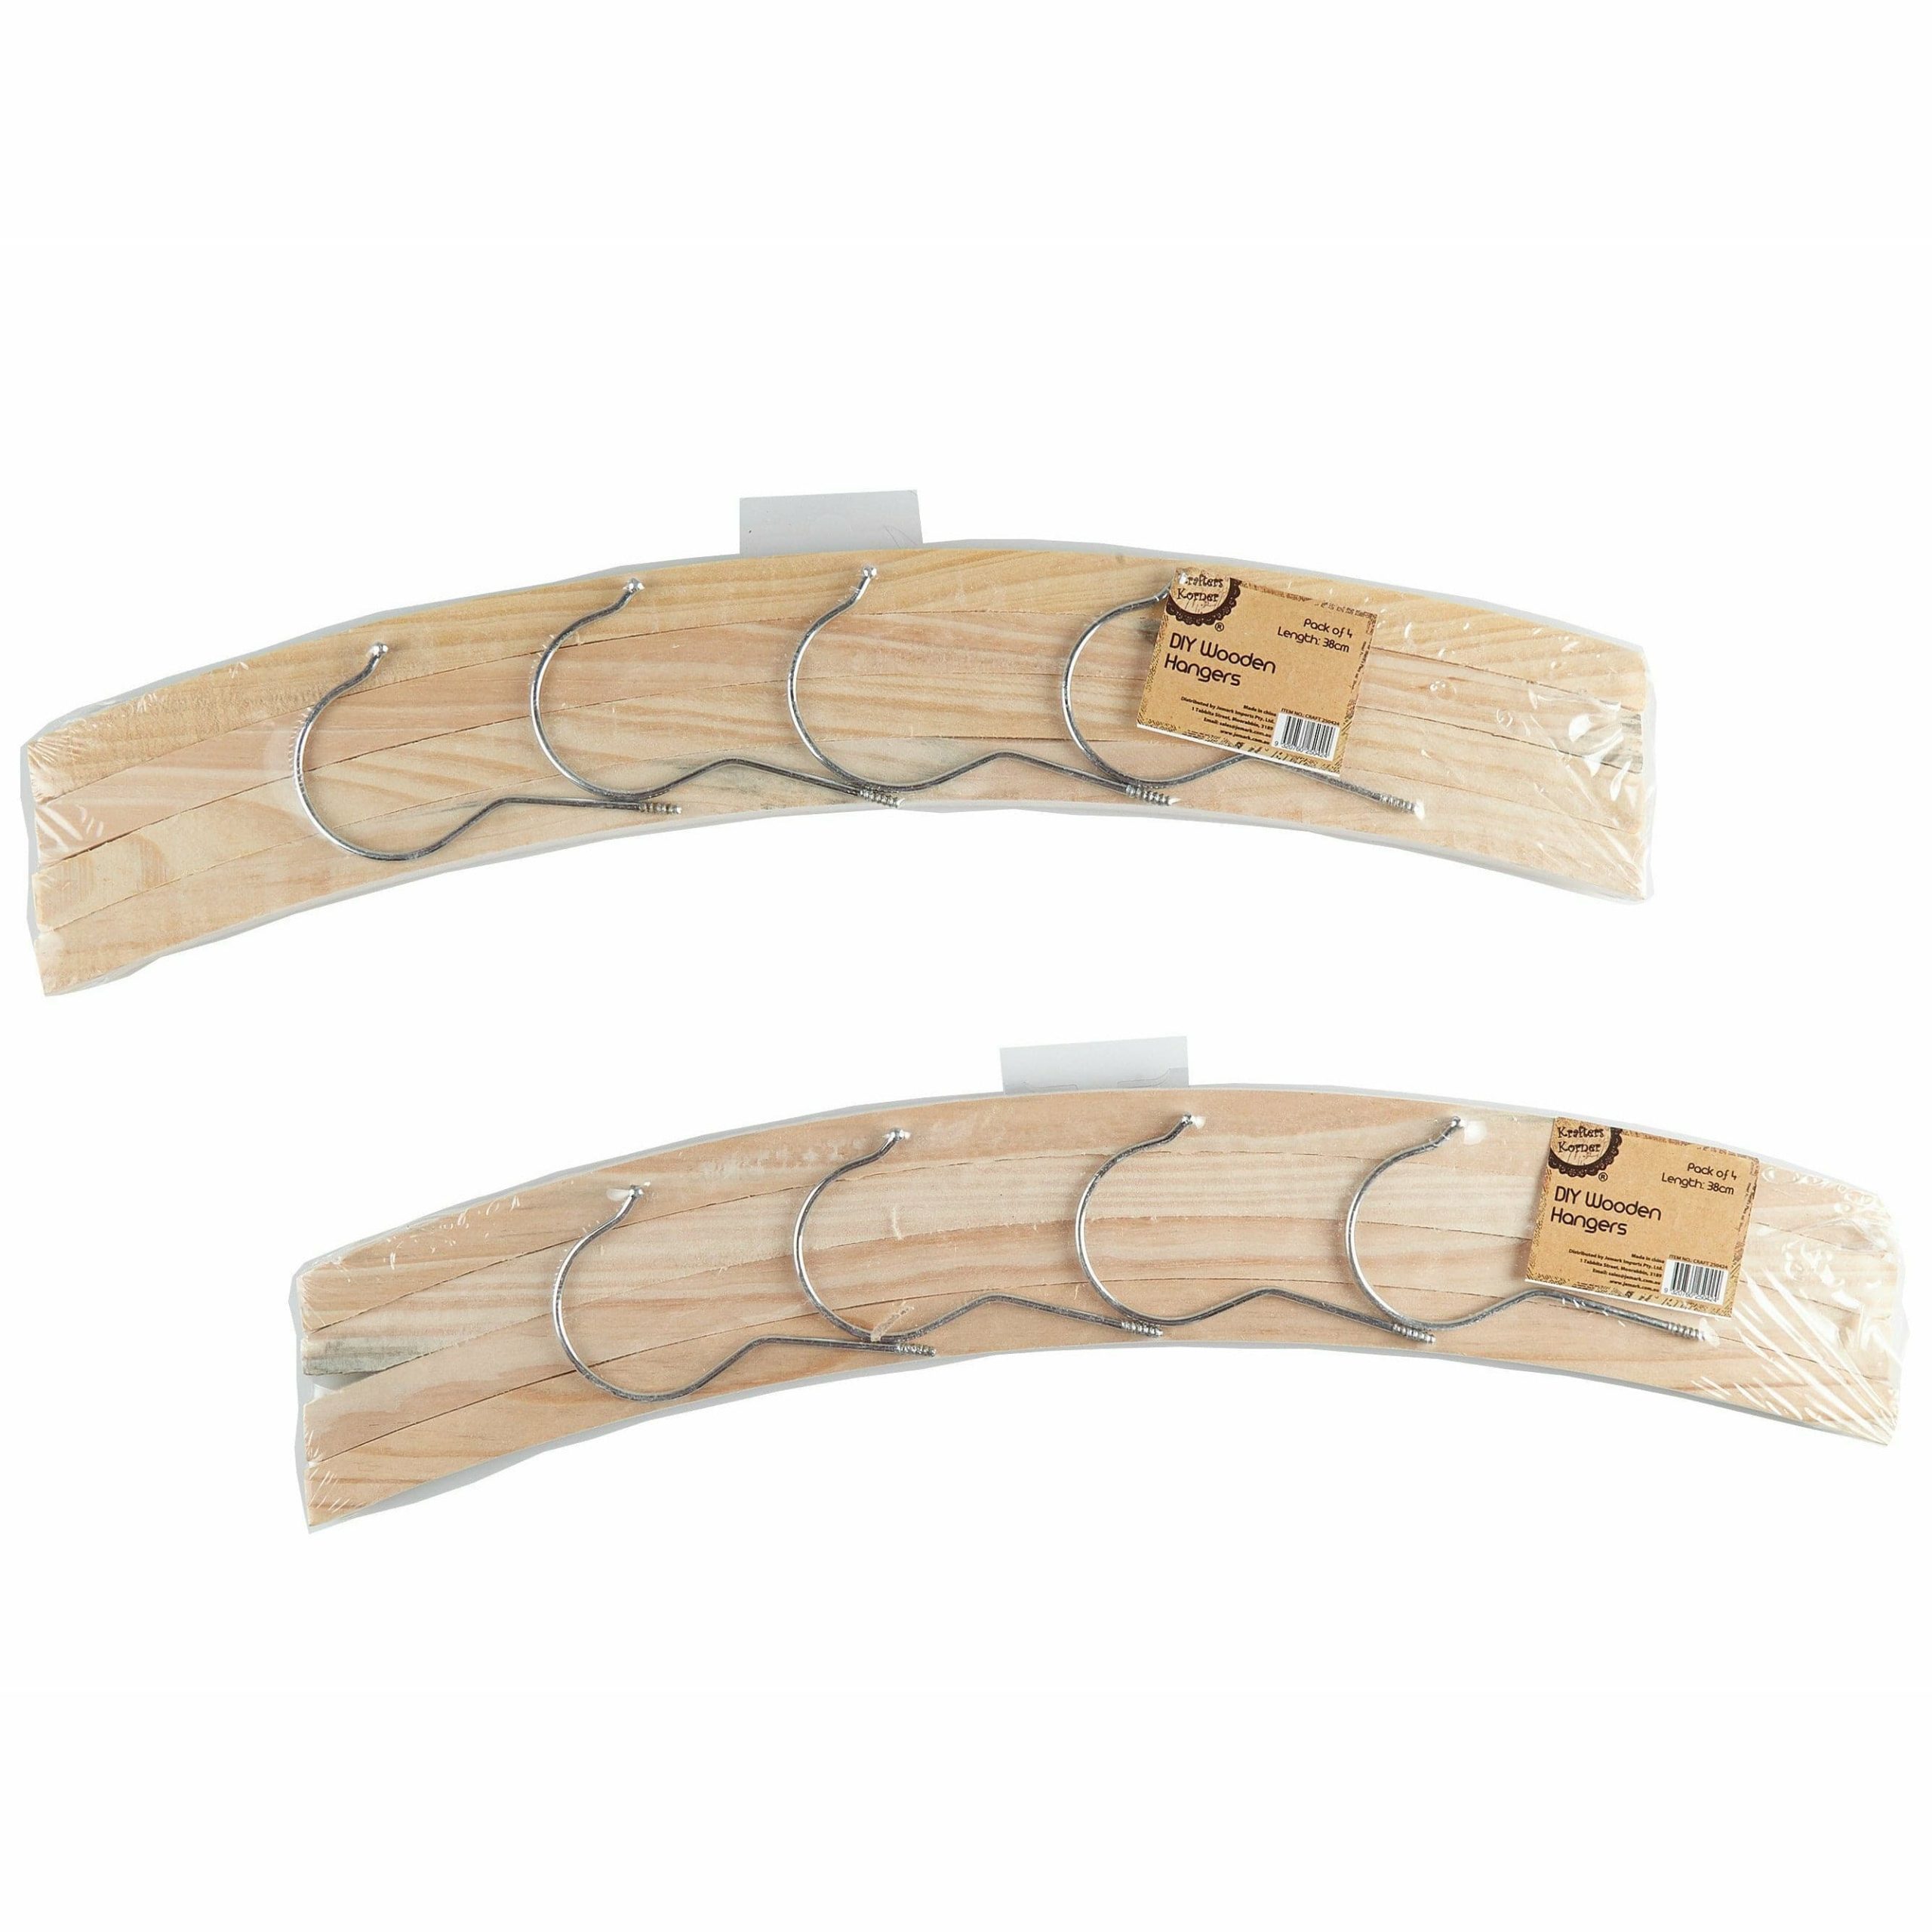 https://www.shopriot.shop/wp-content/uploads/1689/18/the-newest-krafters-korner-adult-craft-wooden-hanger-4-pack-jem-is-now-available-for-purchase-for-sale-at-a-bargain-price_0-scaled.jpg